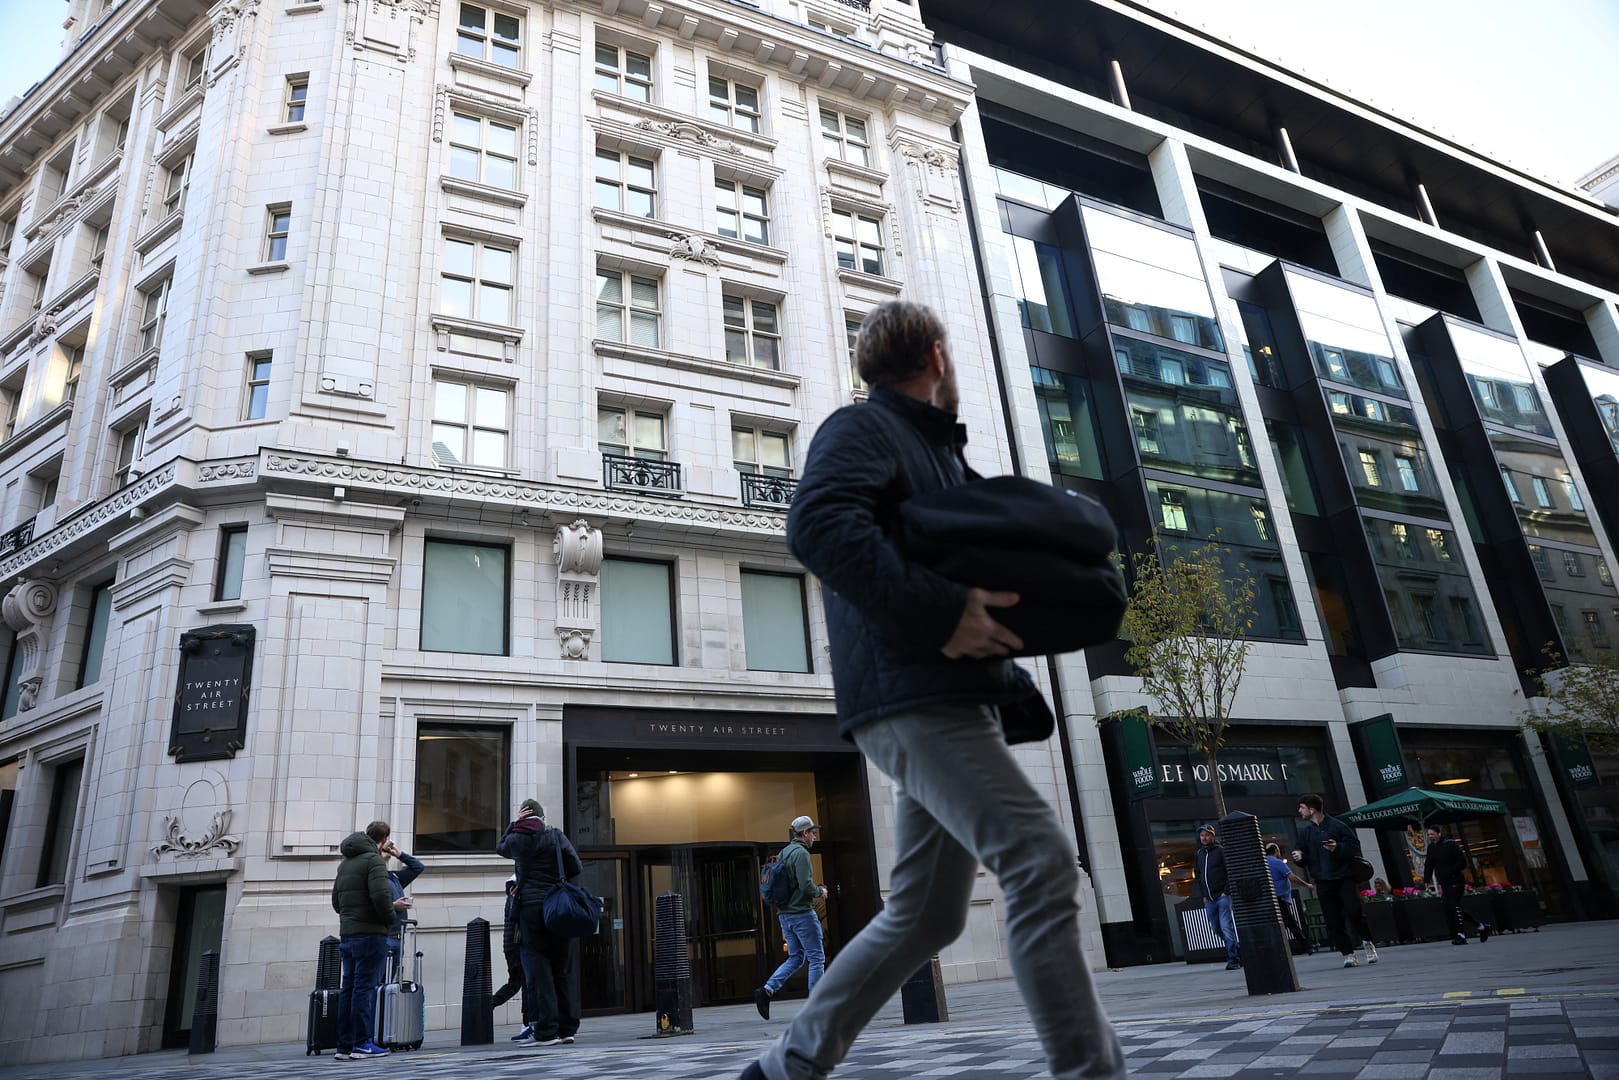 People walk past the building containing the Twitter UK headquarters in central London, Britain